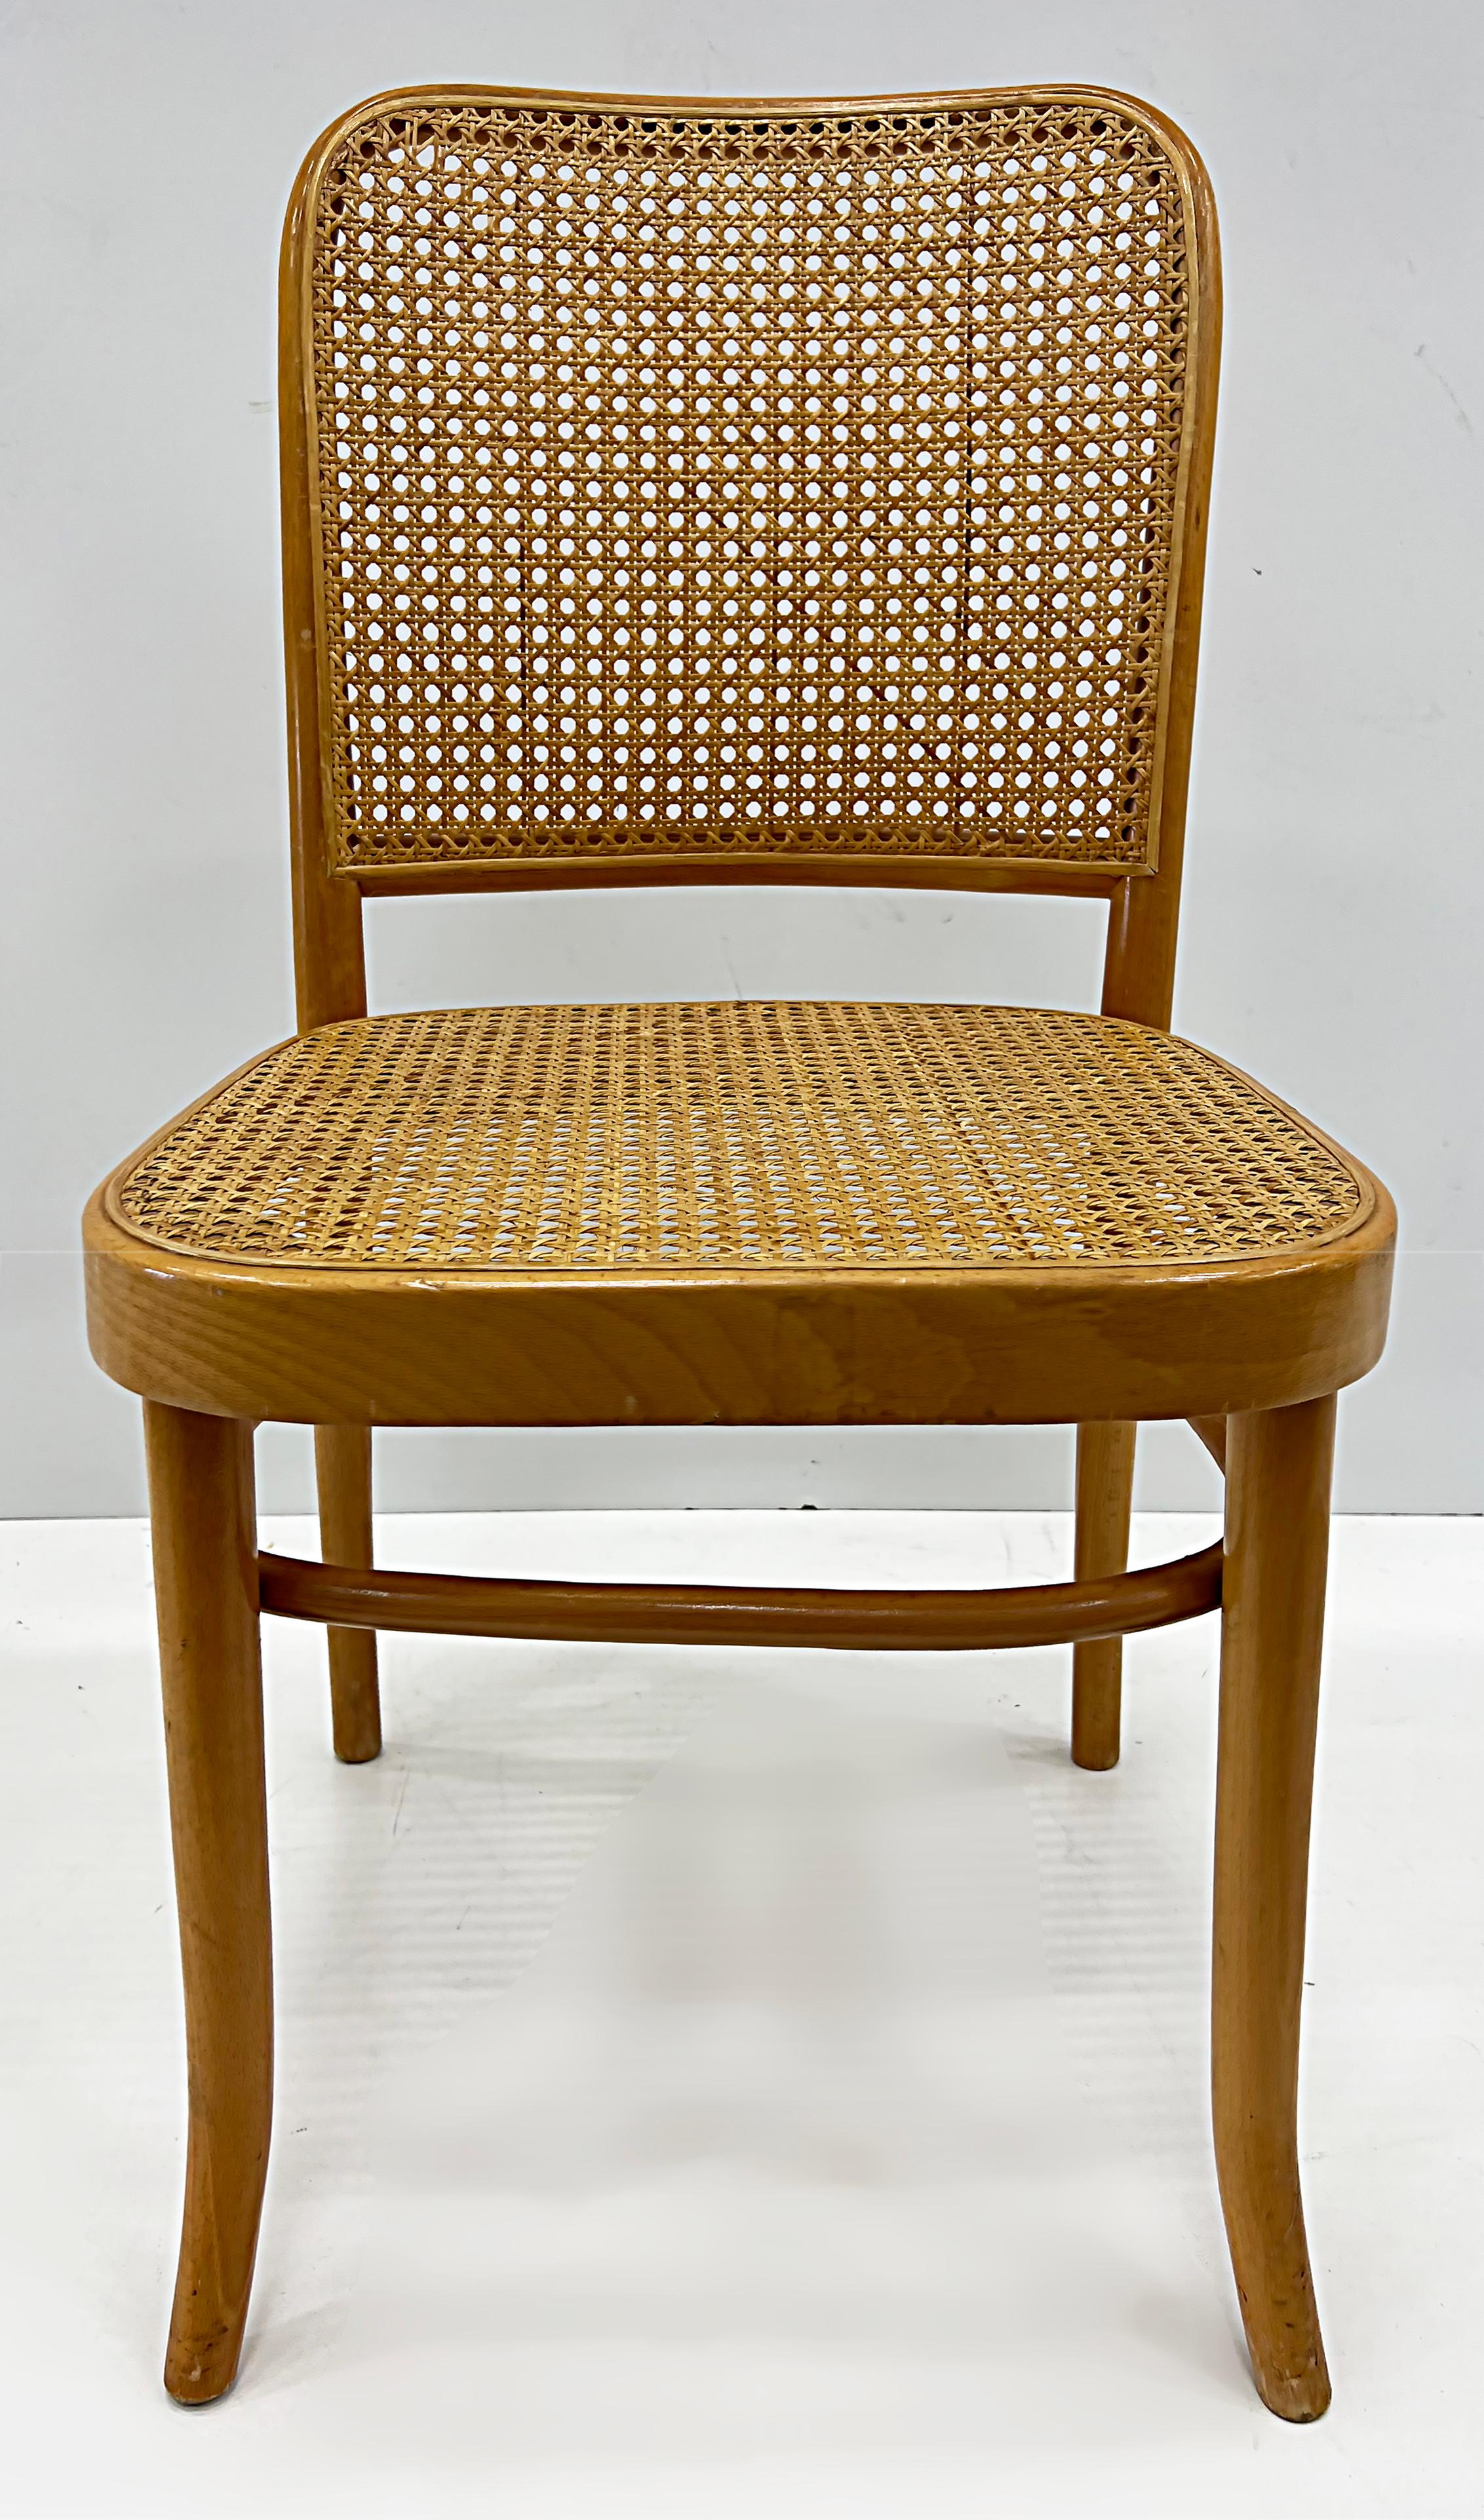 Salvatore Leone Vintage bentwood caned chairs, thonet style.

Offered for sale is a pair of vintage Thonet style bentwood chairs with caned seats and backs by Salvatore Leone. They are from Modena, Italy where Salvatore Leone created furniture in